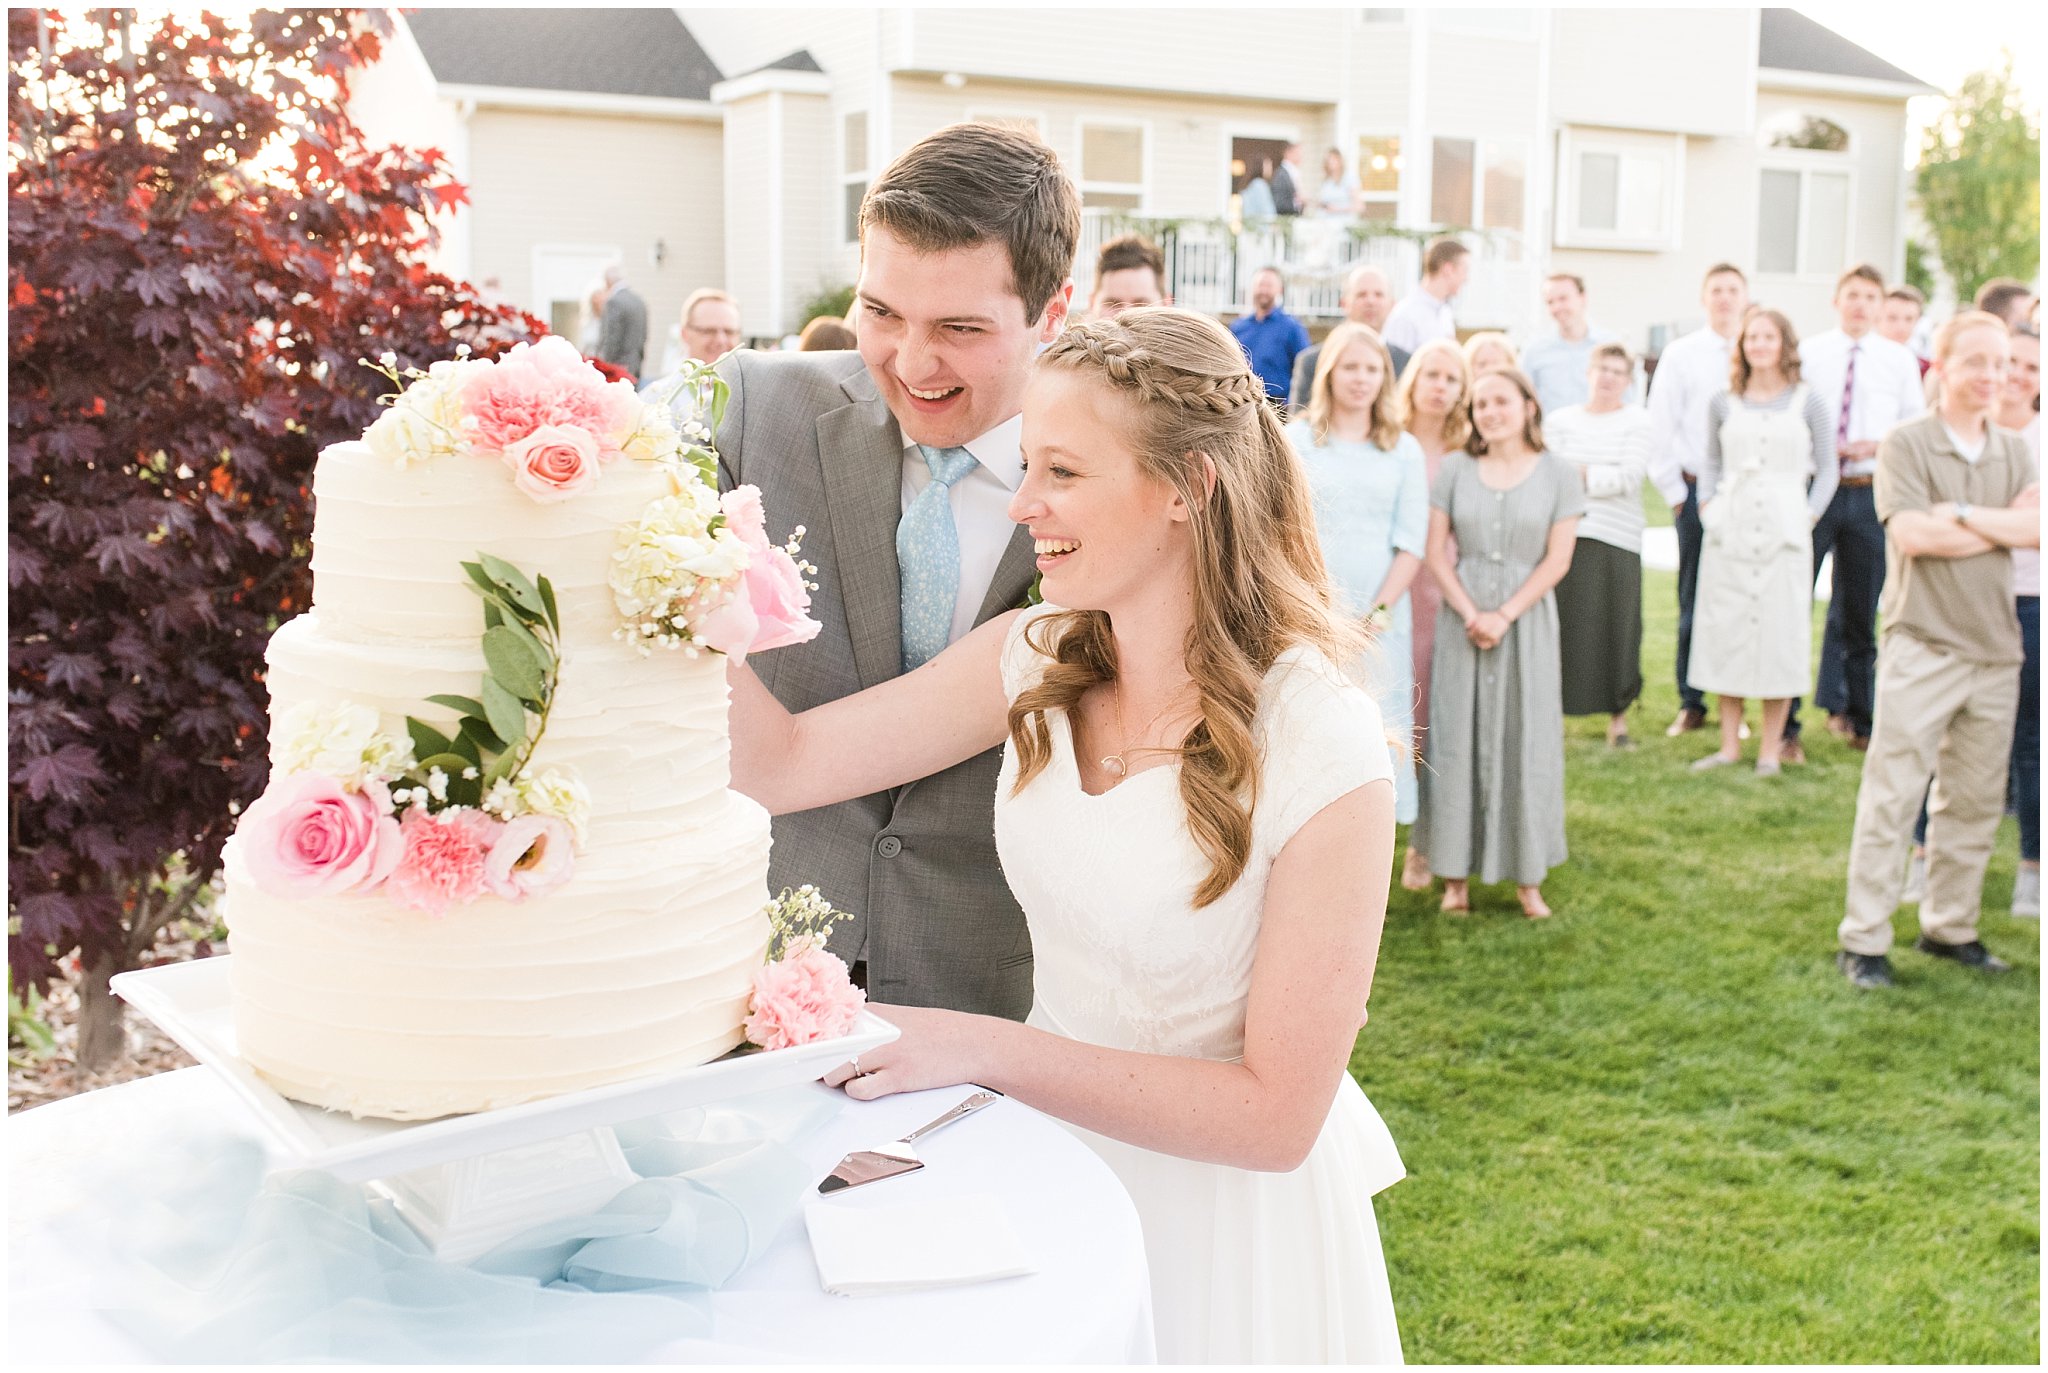 Bride and groom cake cutting | Backyard outdoor spring wedding with grey, blush, and light blue wedding colors | Spring Provo City Center Temple Wedding | Utah Wedding Photographers | Jessie and Dallin Photography